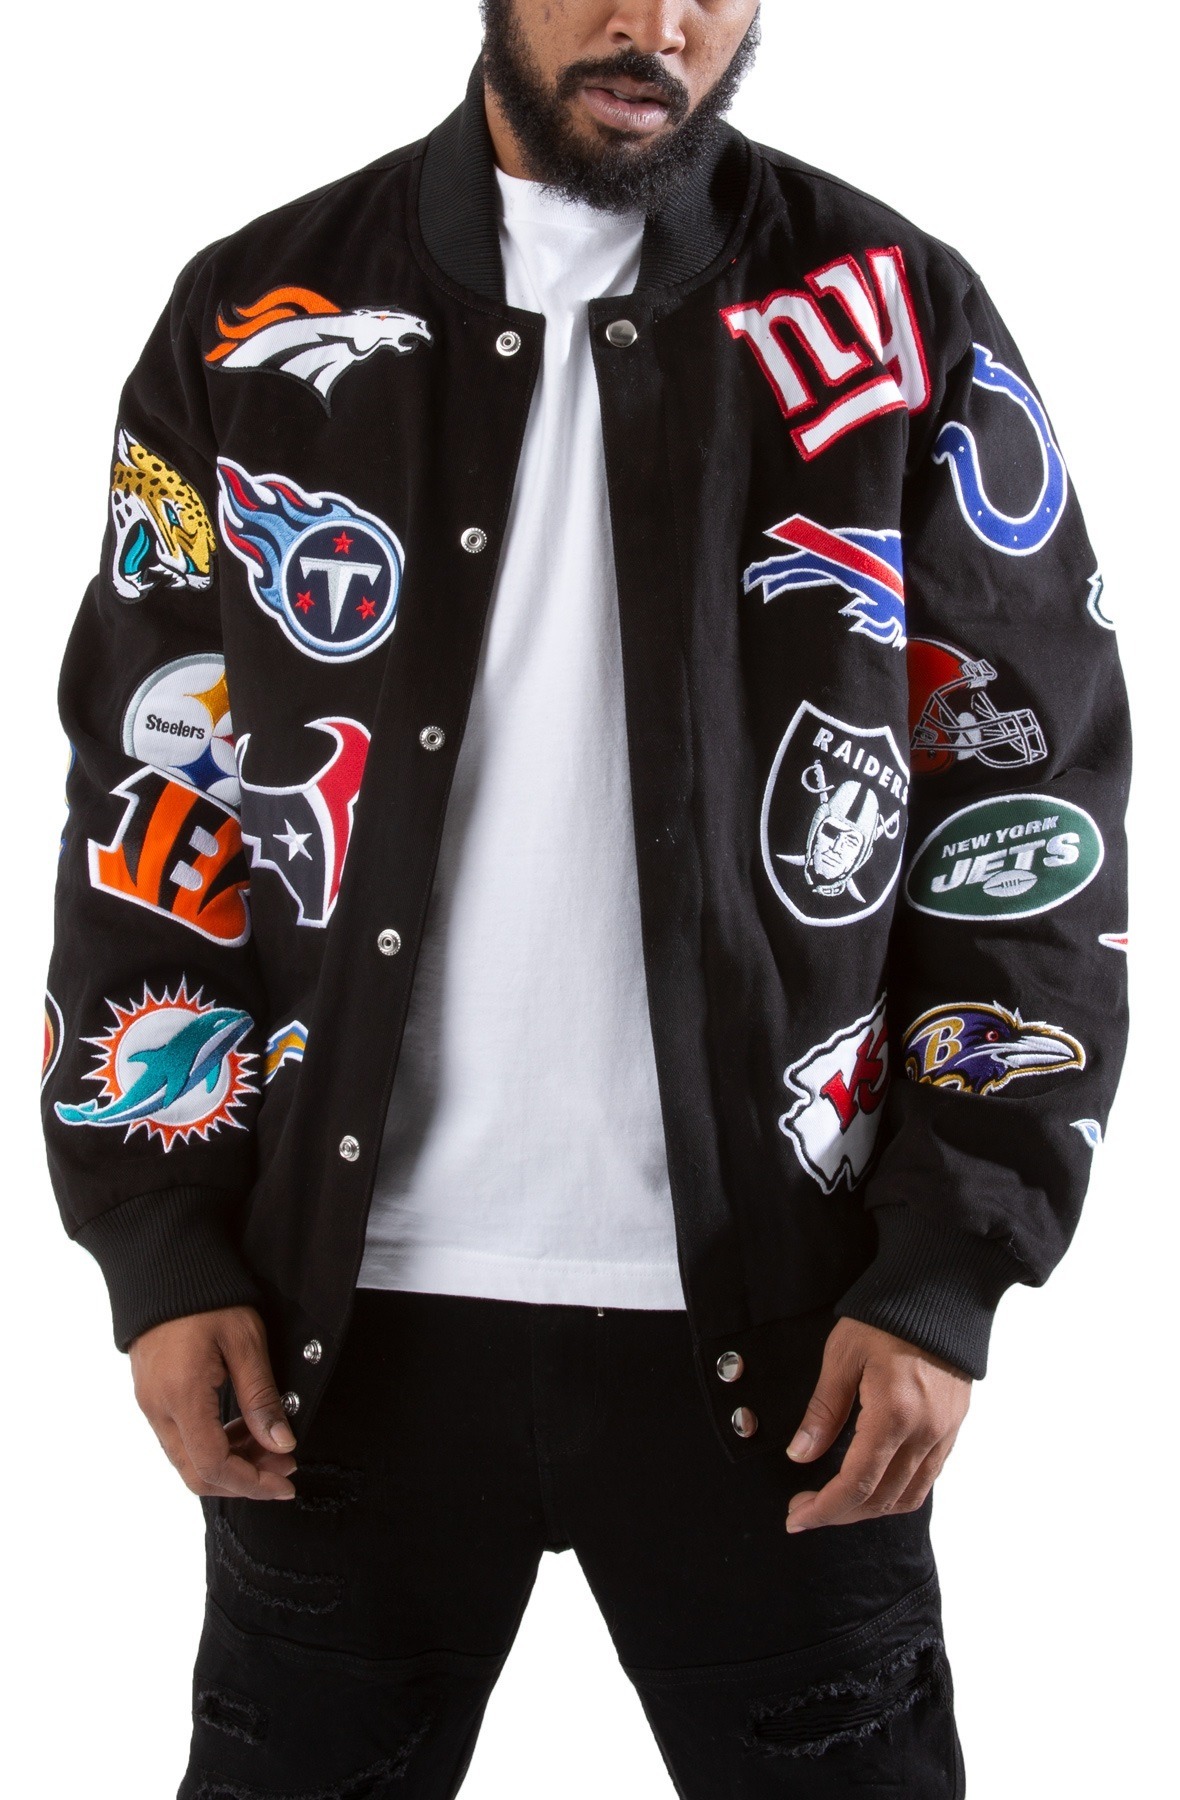 Nfl Jacket With All Team Logos